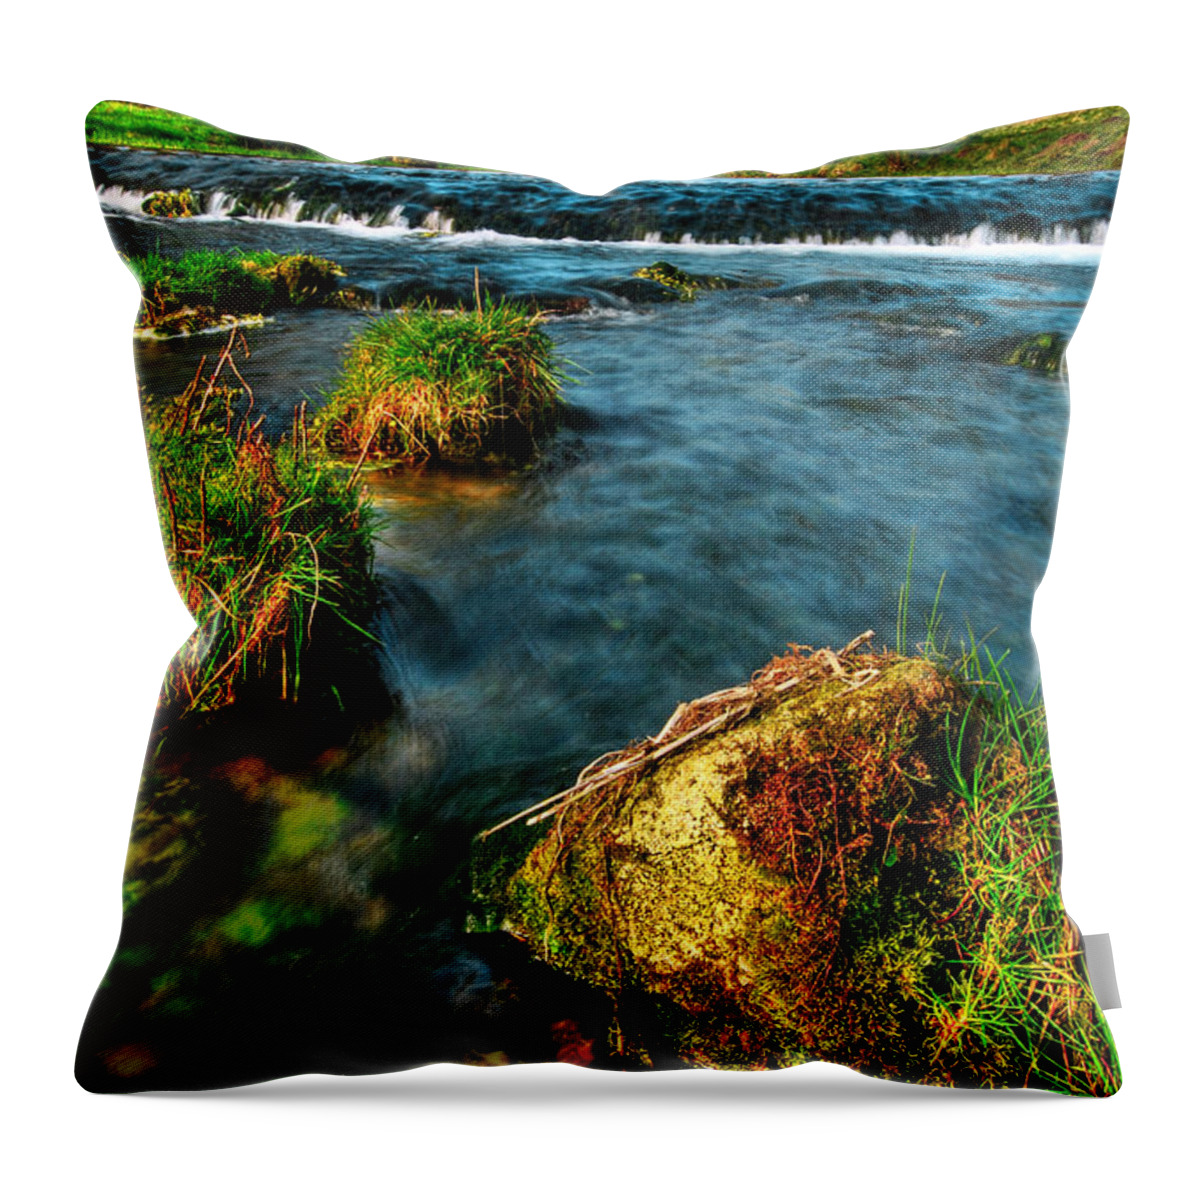  Throw Pillow featuring the photograph Lwv20042 #1 by Lee Winter